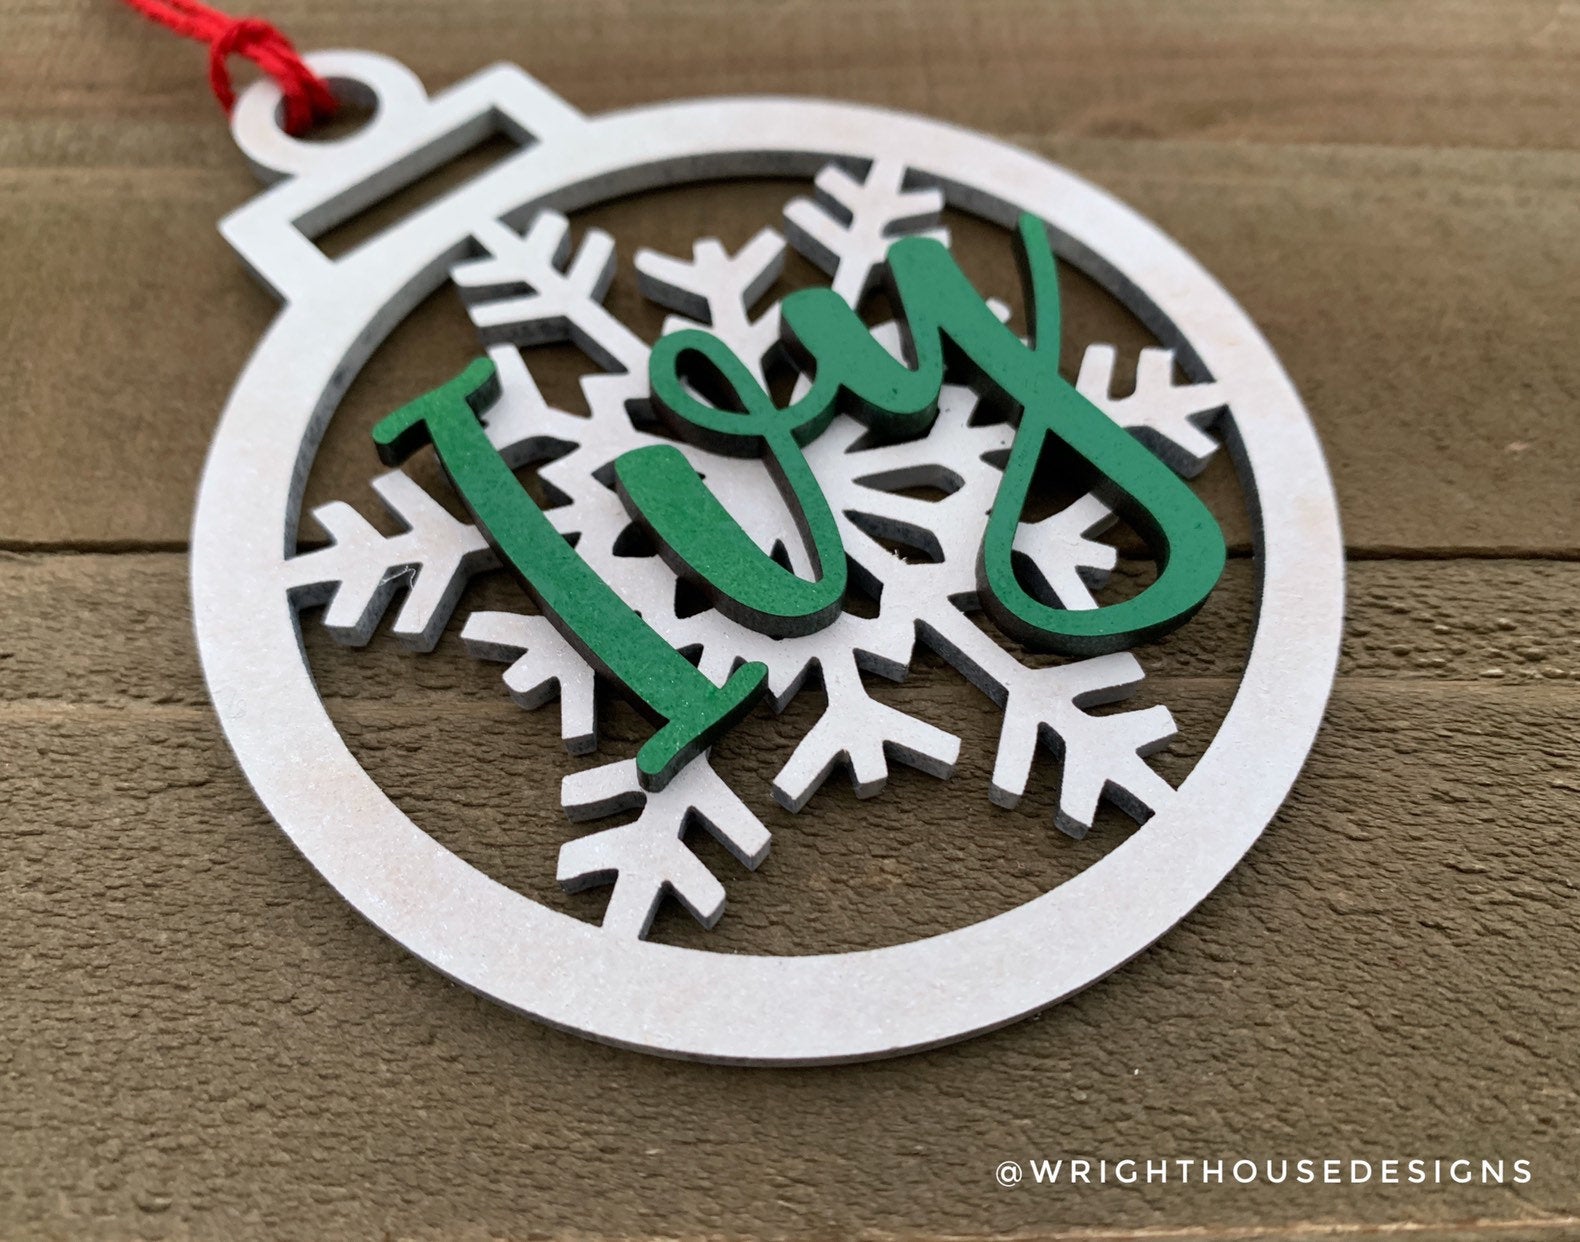 Personalized Snowflake - Wooden Christmas Tree Ball Ornament - 3D - Customizable Name - Vector Cut - MDF Draftboard - Handmade - Holiday - Wright House Designs